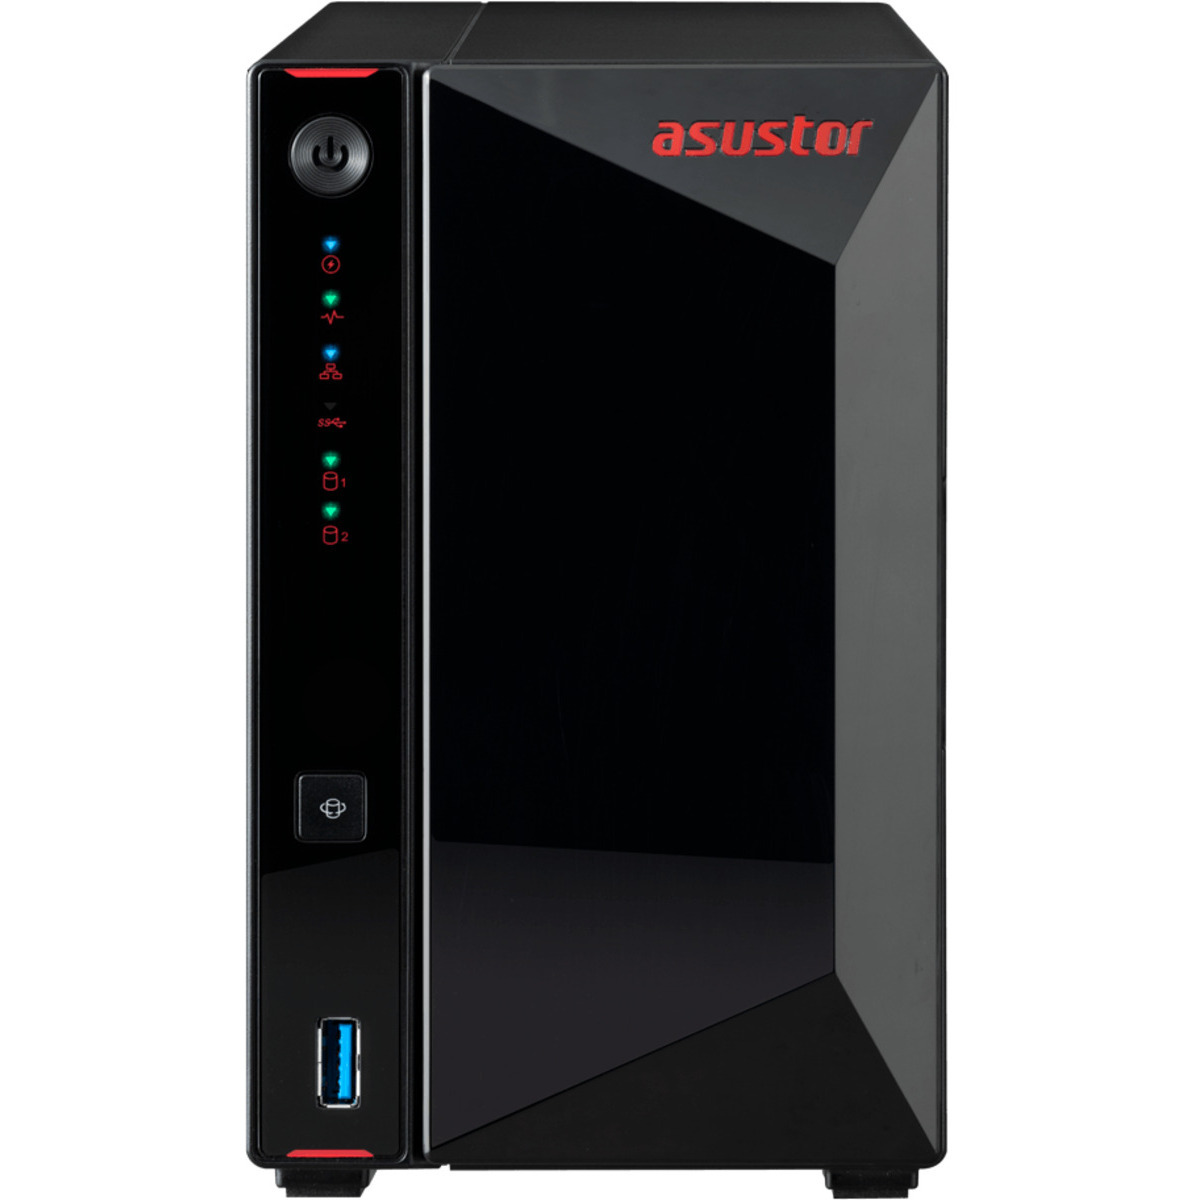 buy $743 ASUSTOR AS5202T Nimbustor 12tb Desktop NAS - Network Attached Storage Device 2x6000gb Seagate IronWolf ST6000VN001 3.5 5400rpm SATA 6Gb/s HDD NAS Class Drives Installed - Burn-In Tested - FREE RAM UPGRADE - nas headquarters buy network attached storage server device das new raid-5 free shipping usa AS5202T Nimbustor